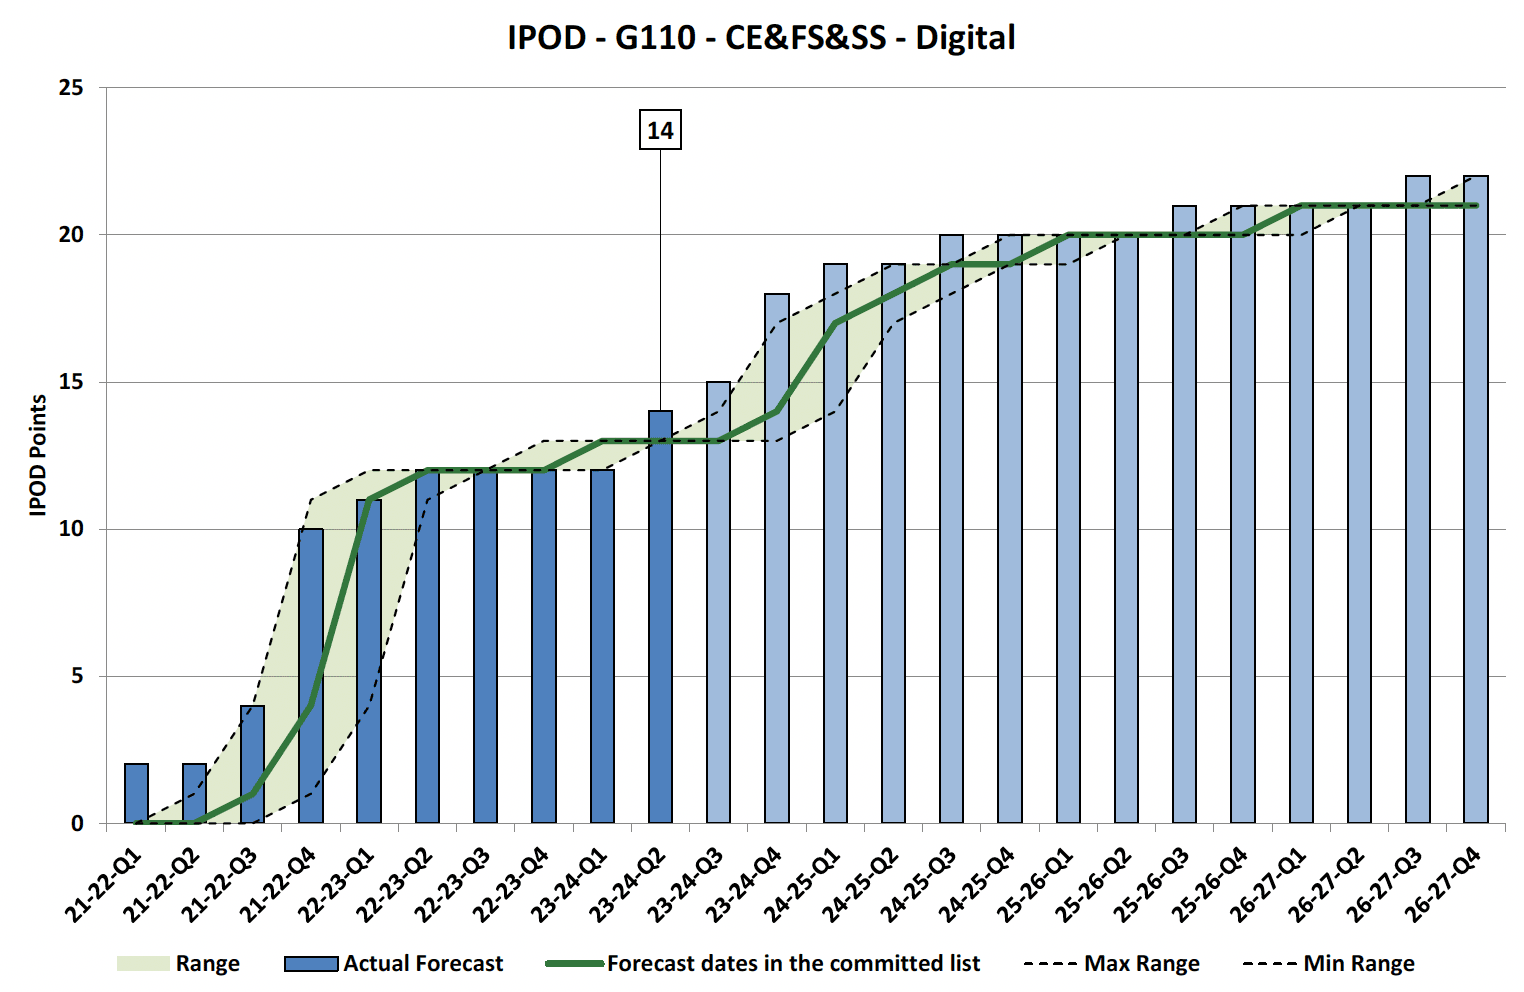 Chart showing IPOD points achieved or forecast for Financial Completion milestone against target range for Digital Projects in CE&FS&SS Portfolio